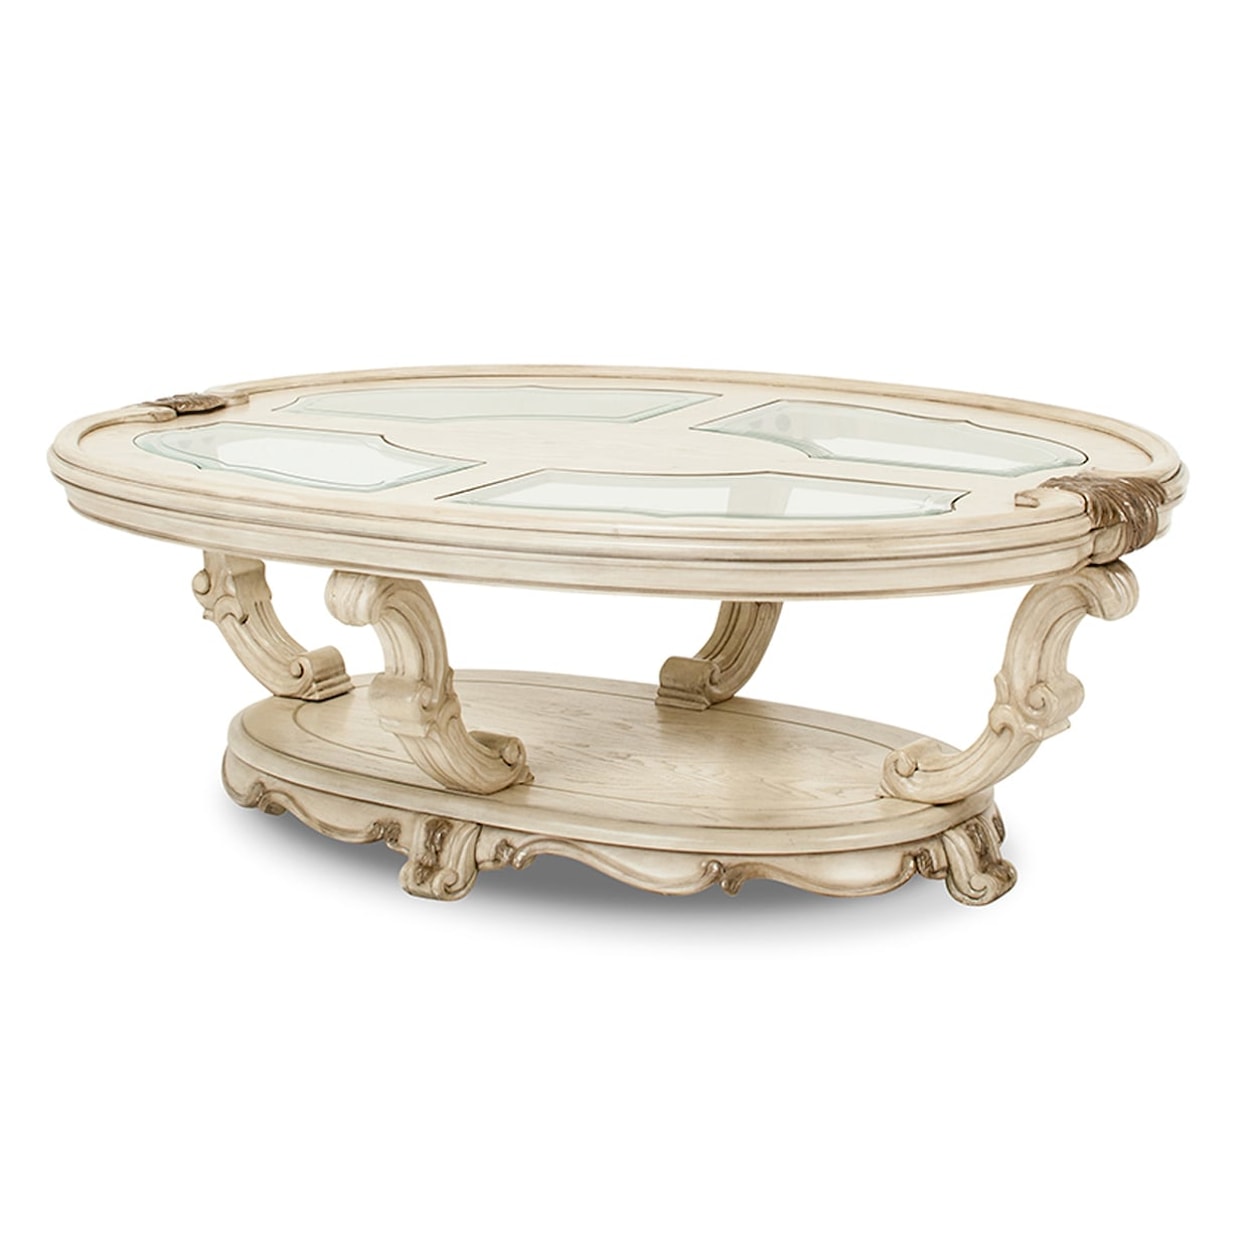 Michael Amini Platine de Royale Two-Tier Oval Cocktail Table